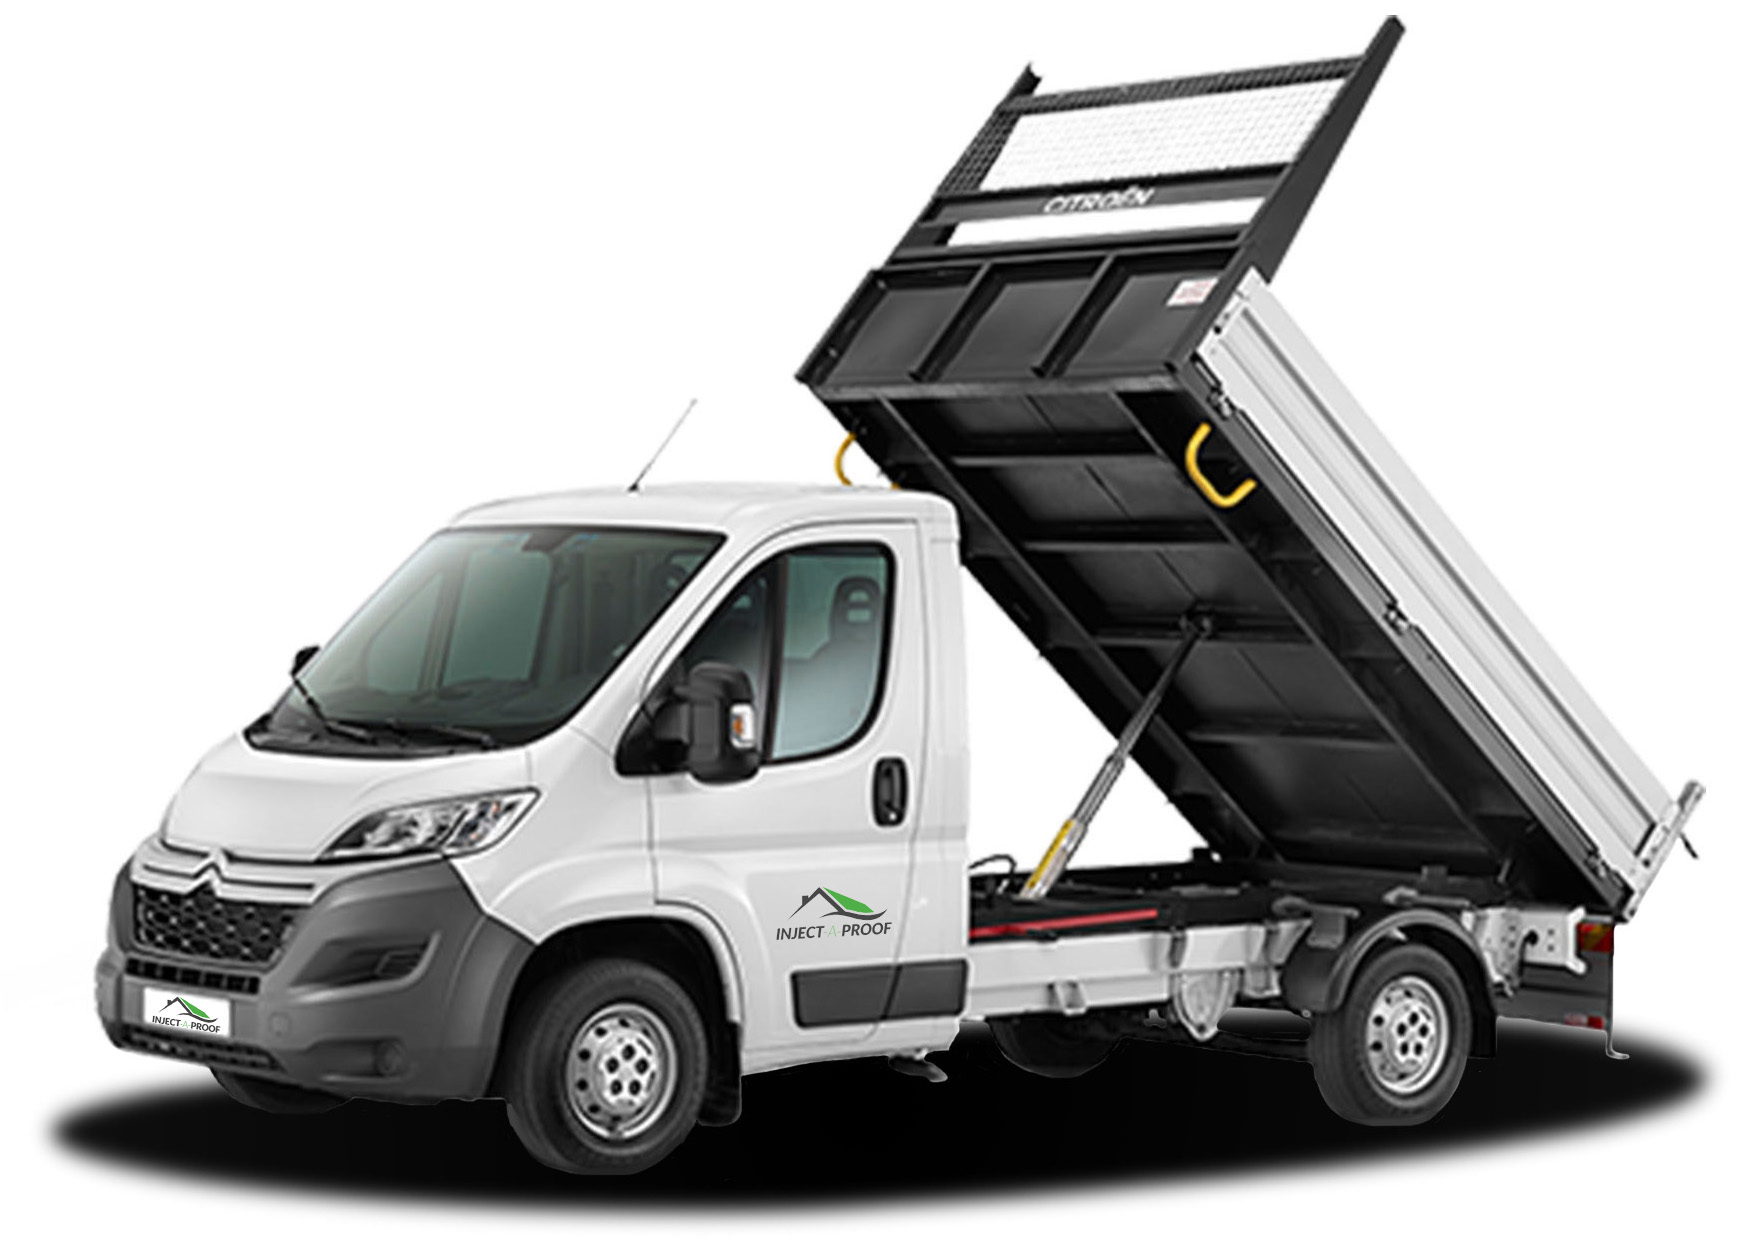 builders waste removal service